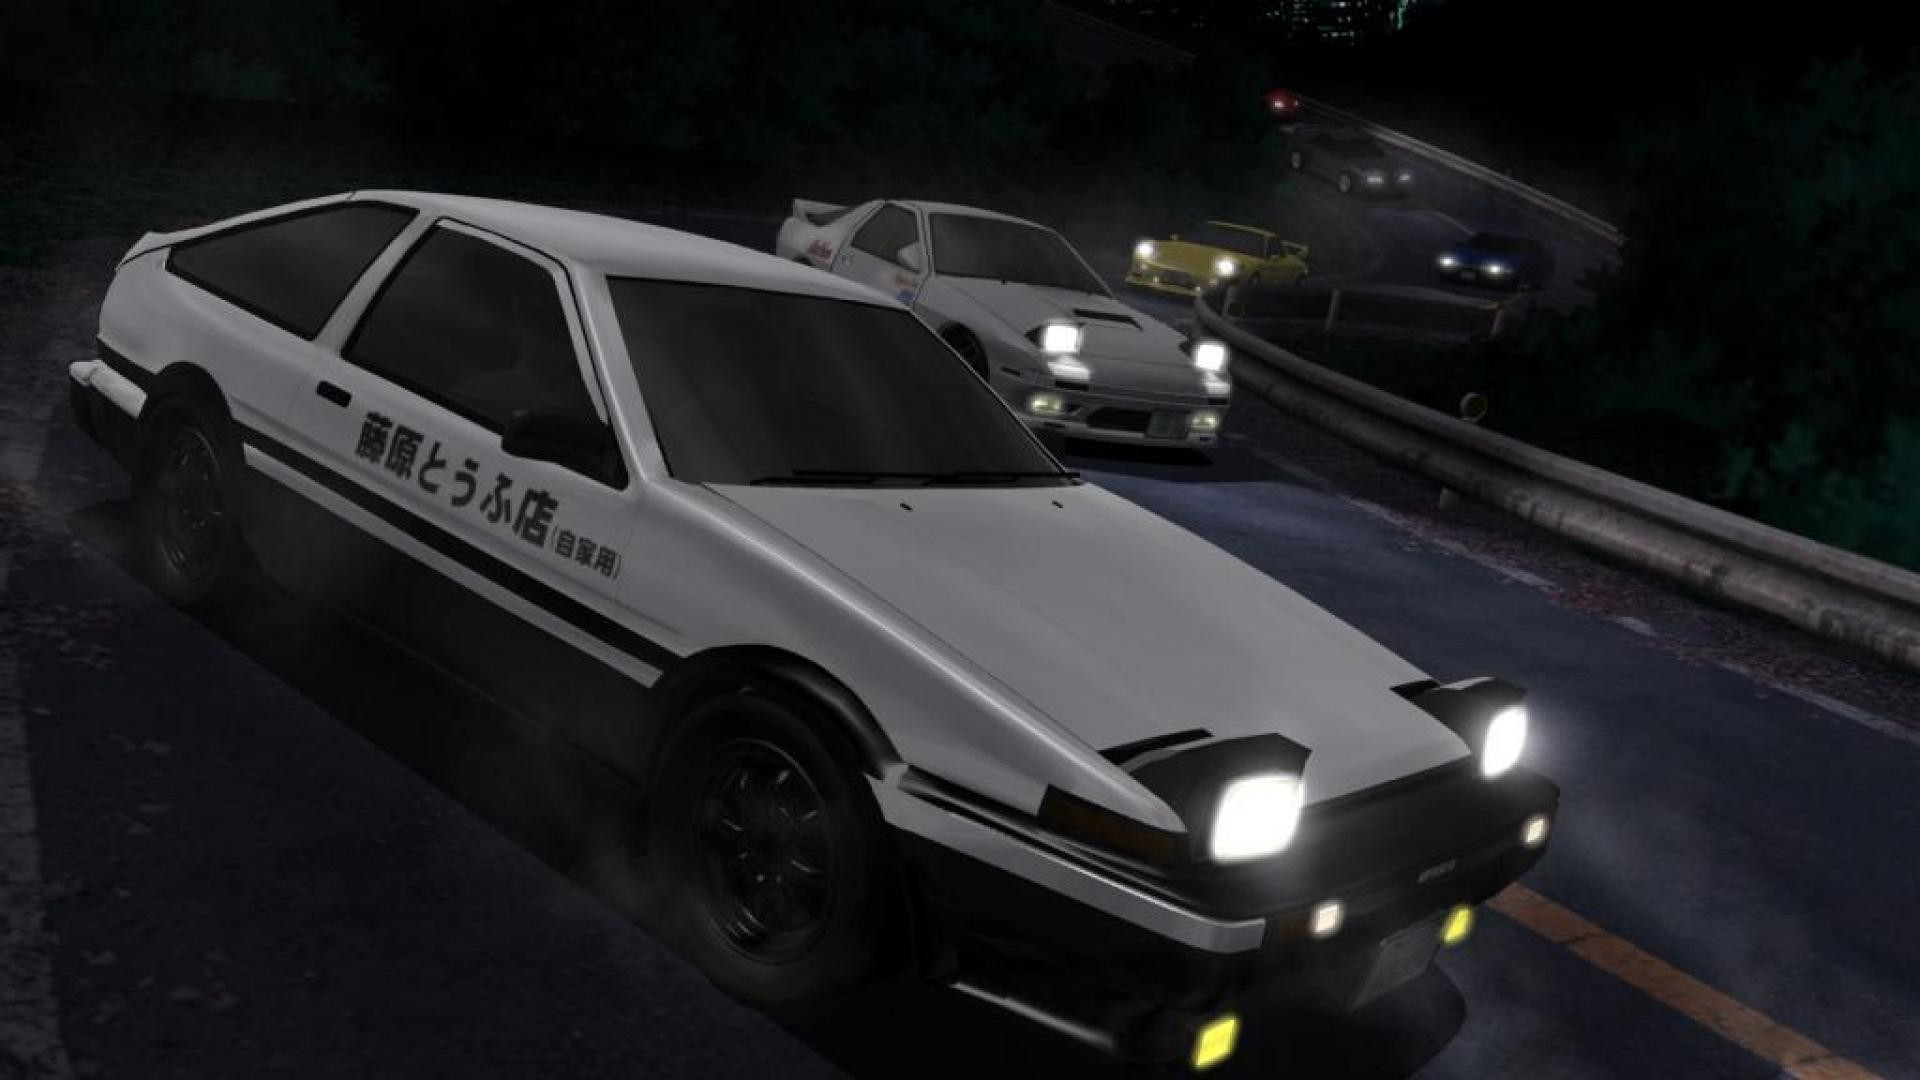 1920x1080 To those who have seen Initial D and Wangan Midnight - Devil Z VS AE86,  which do you like better?